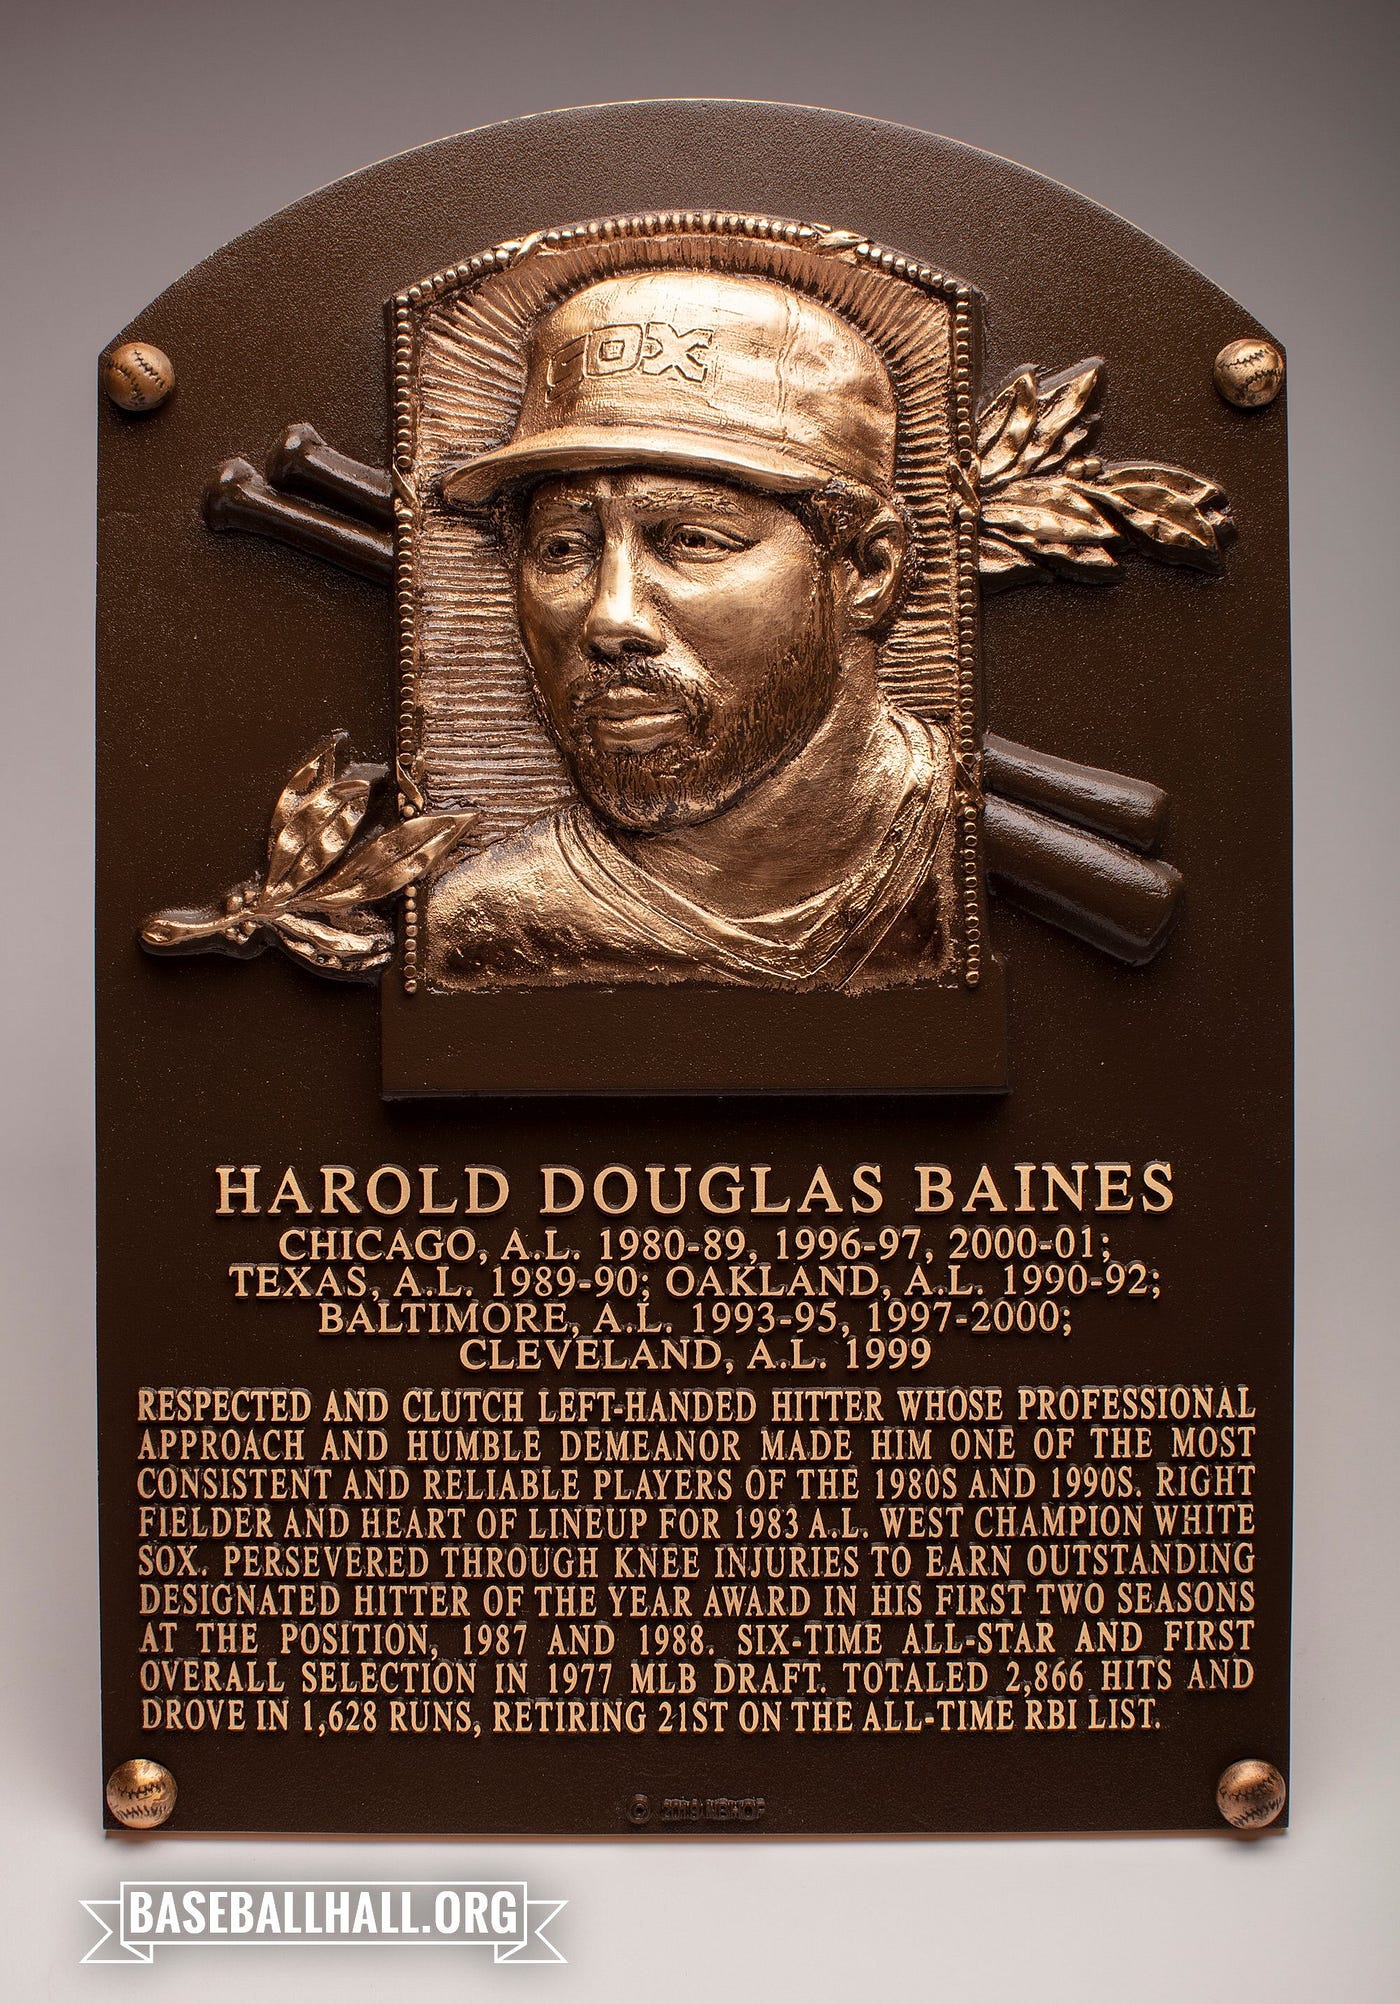 Harold Baines and Lee Smith are in the Hall of Fame, which is sure  something. 